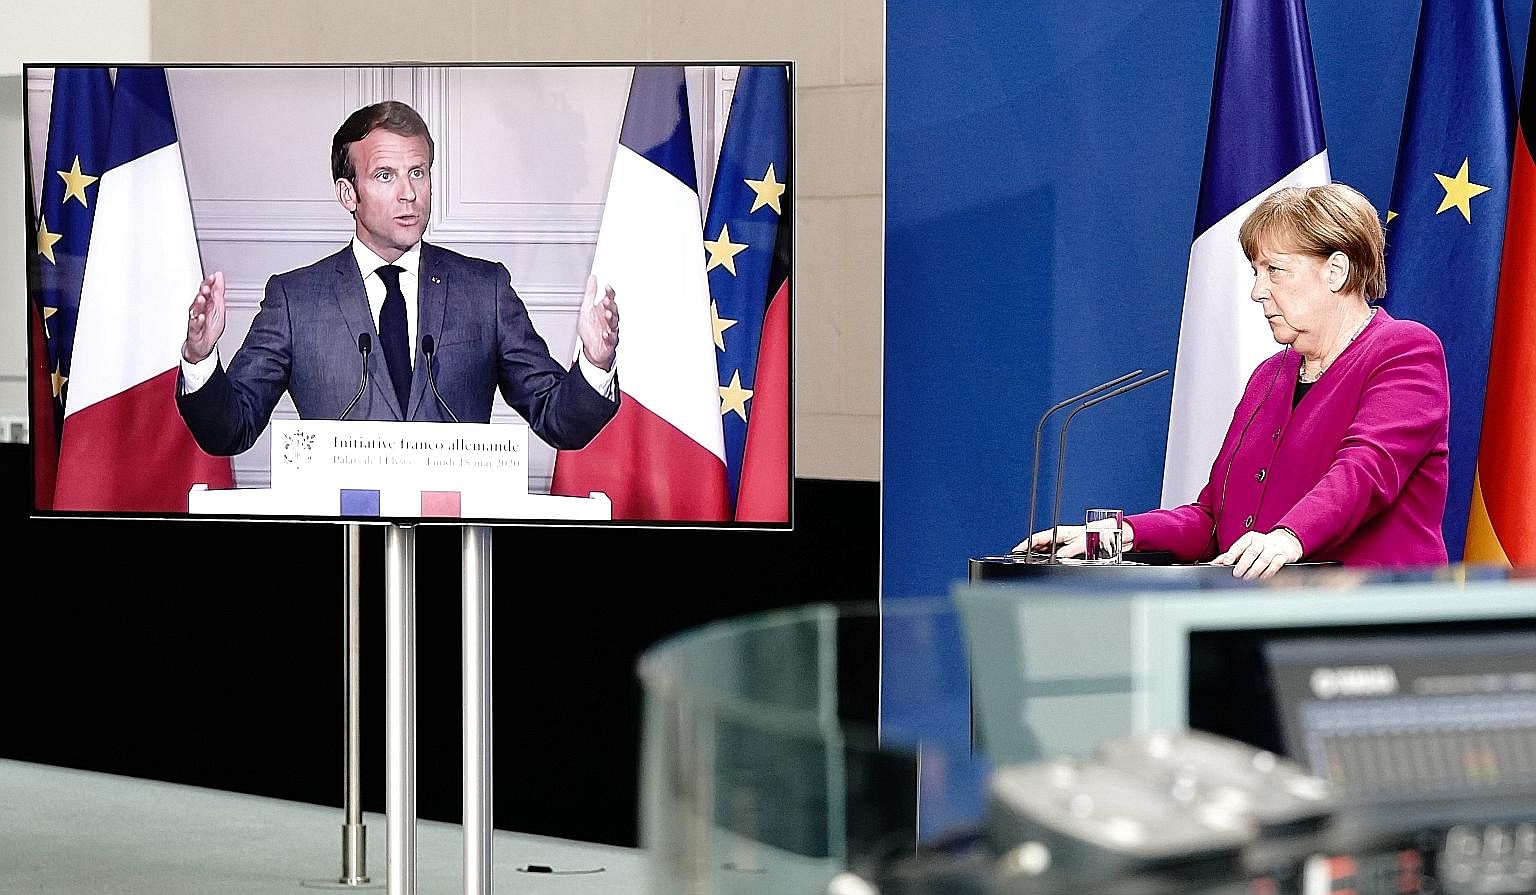 French President Emmanuel Macron and German Chancellor Angela Merkel at their joint video news conference on Monday, during which they supported the idea of creating a €500 billion (S$775 billion) bond designed to assist countries and industries se